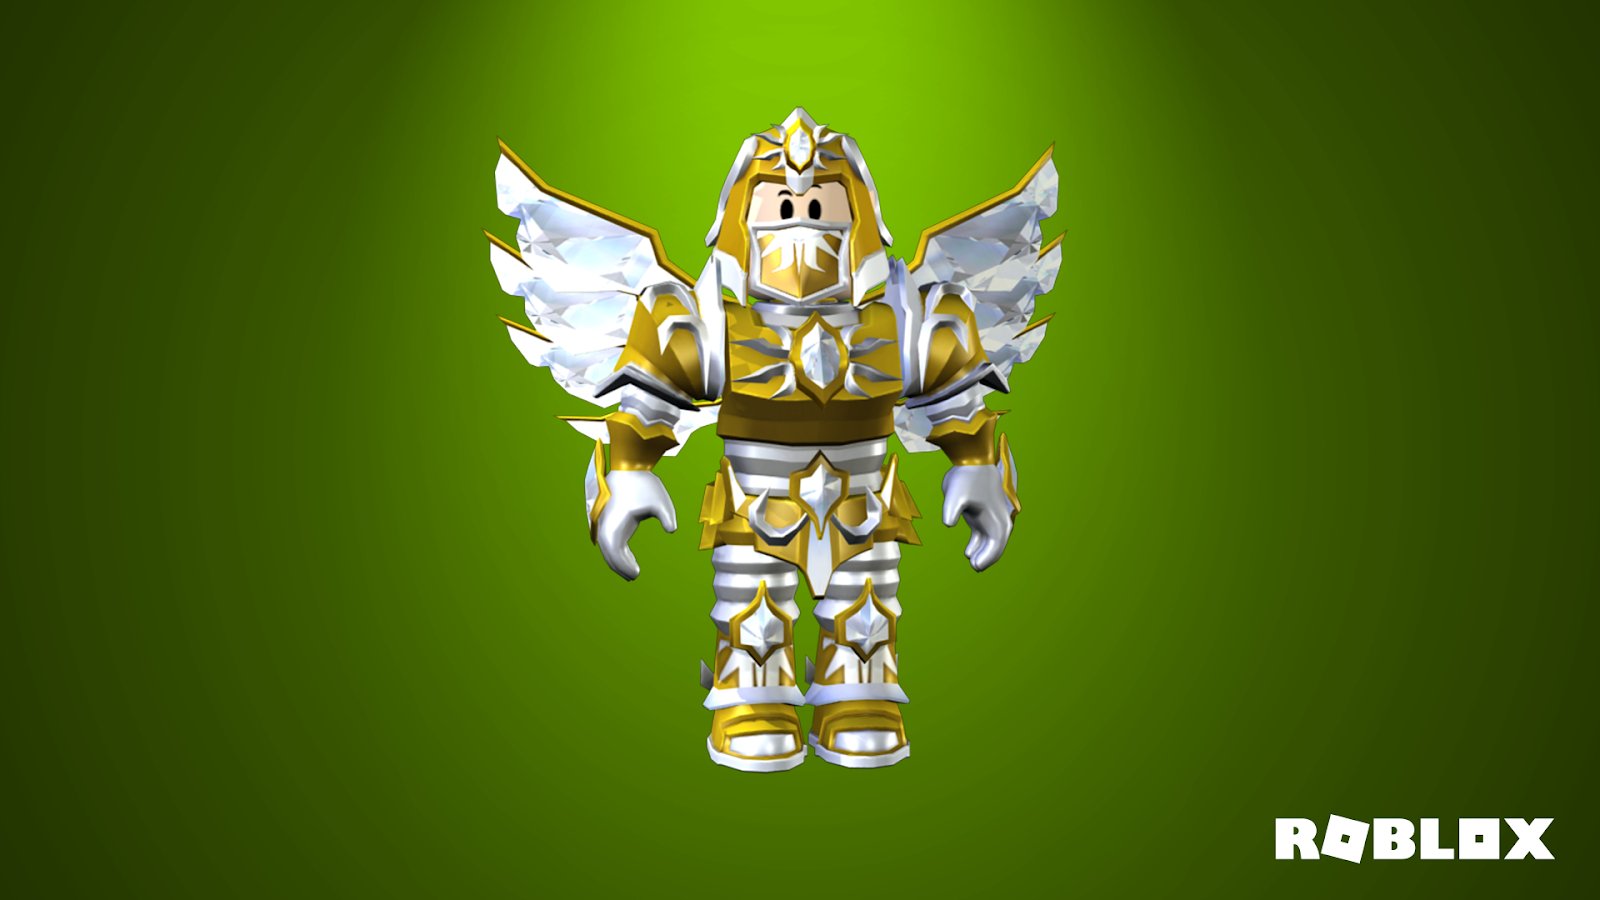 clockwork had a website back in 2008 for roblox wallpapers